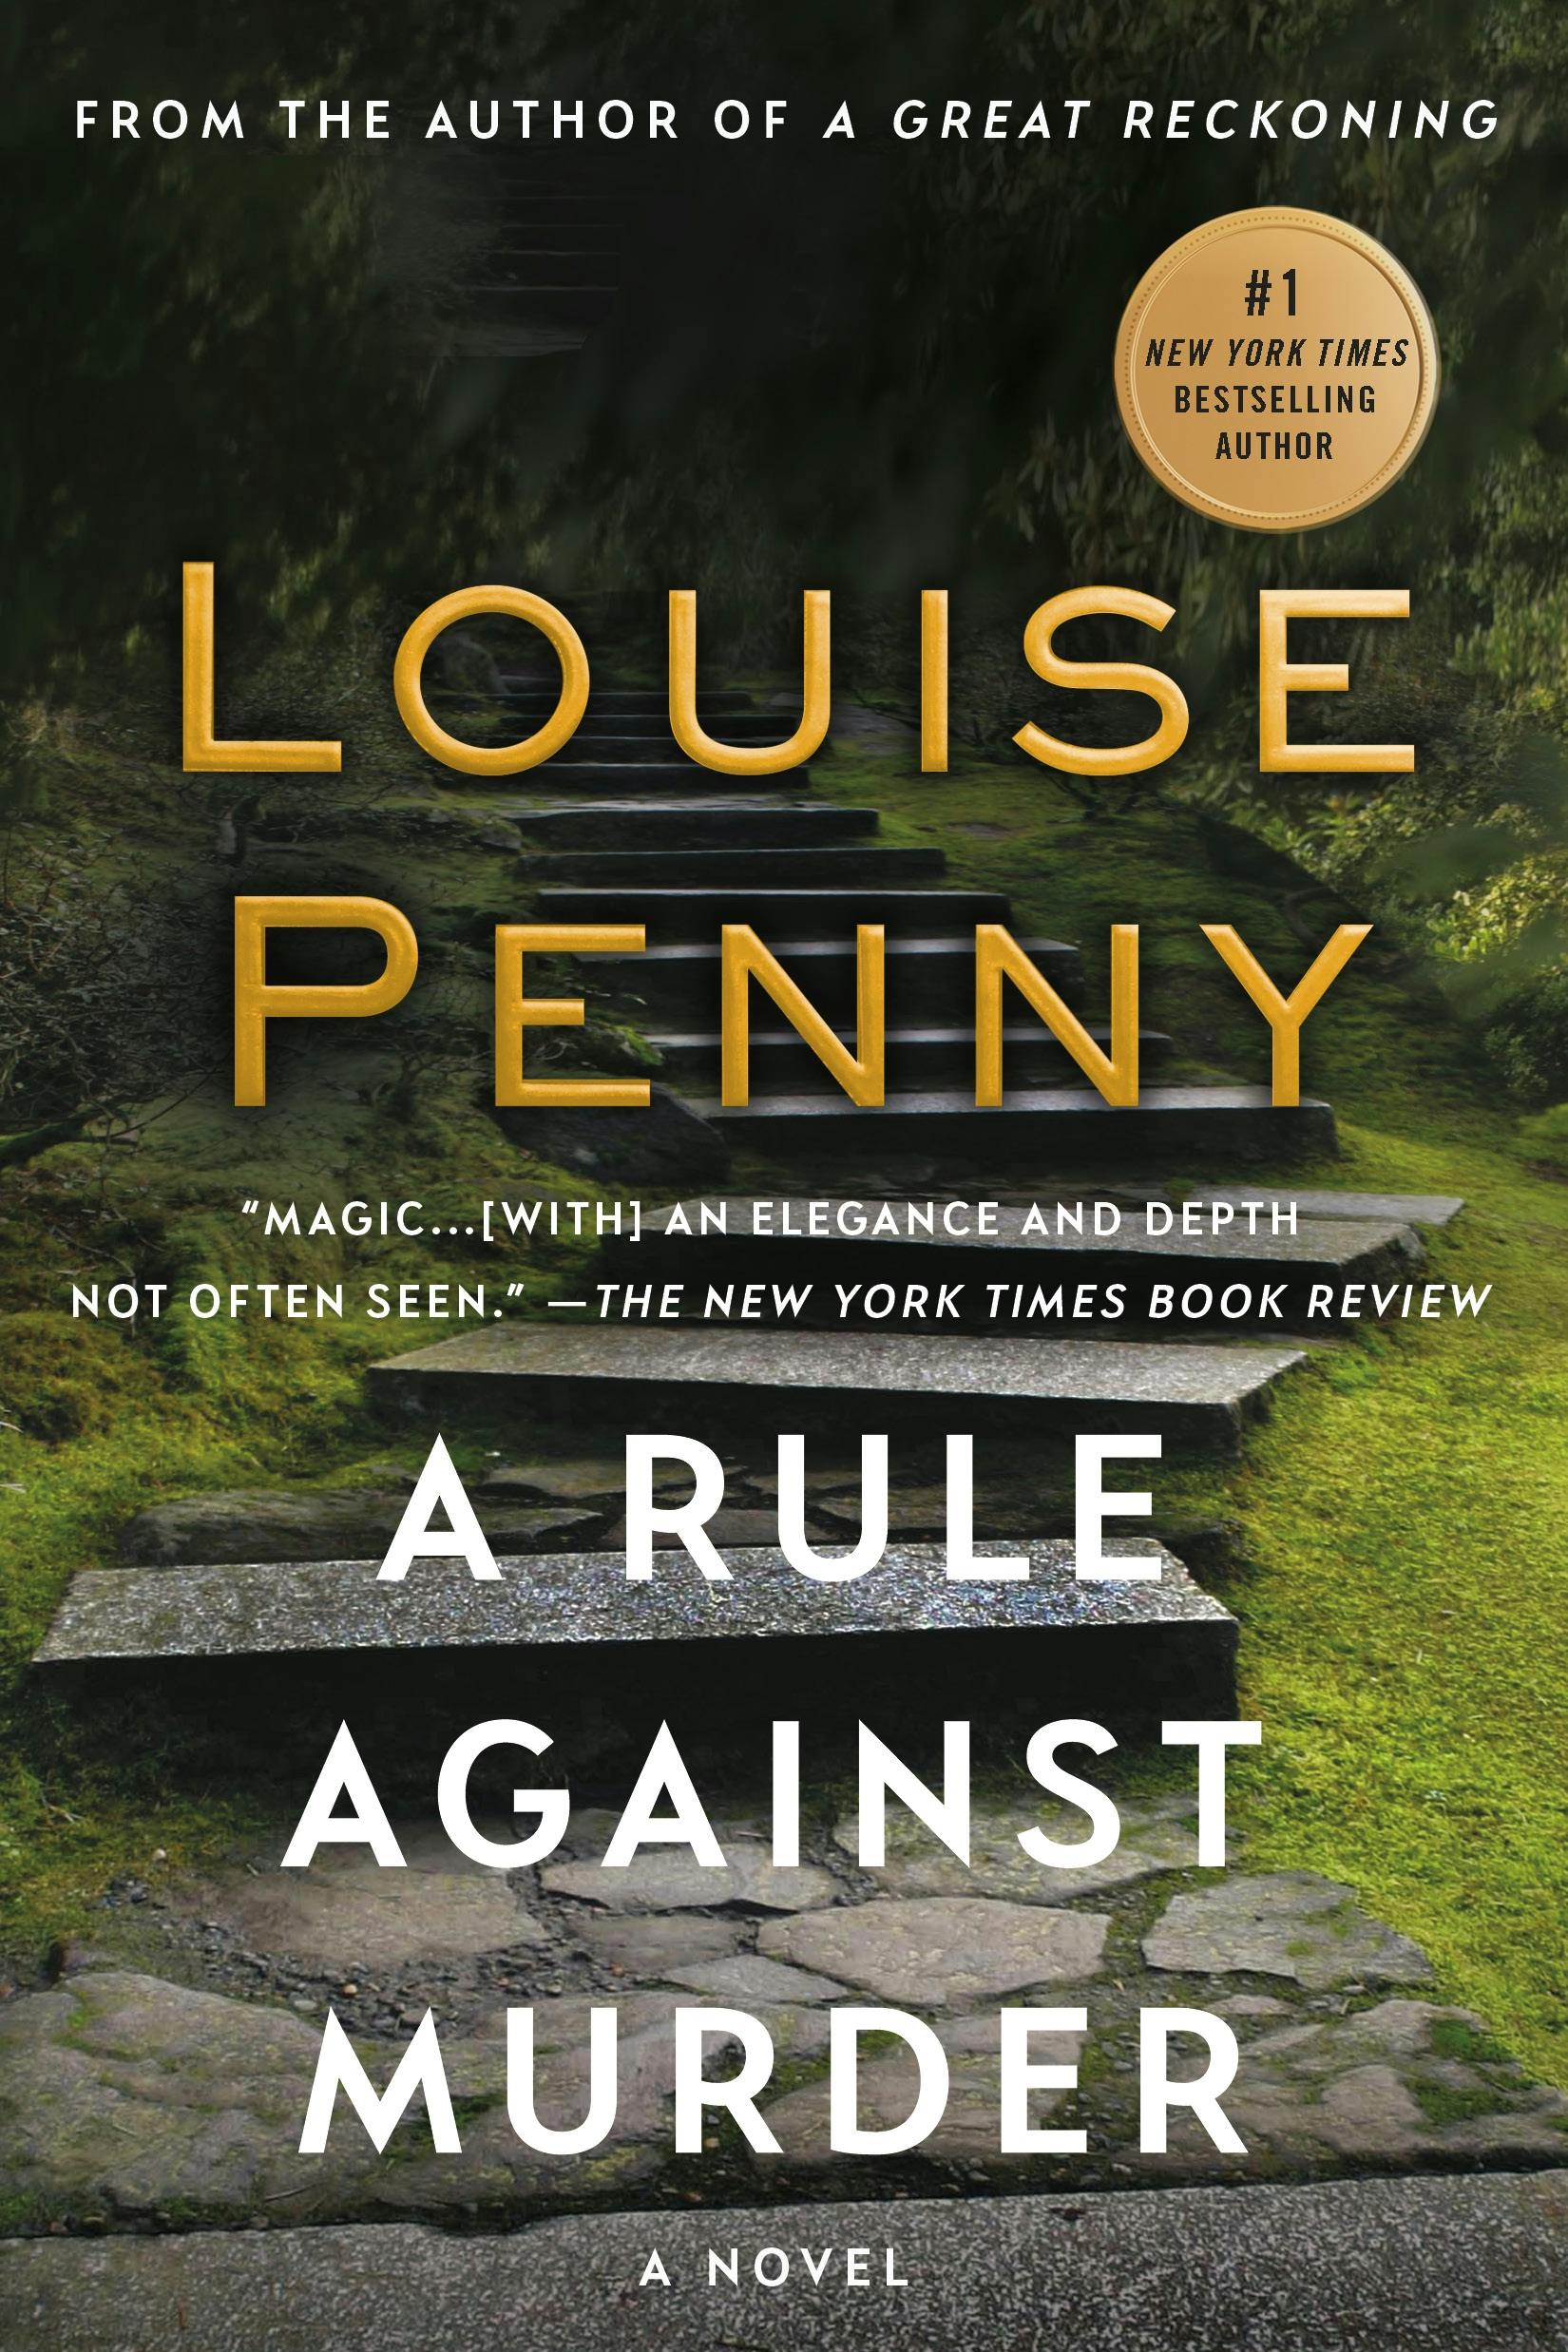 Chat live with author Louise Penny about 'Kingdom of the Blind